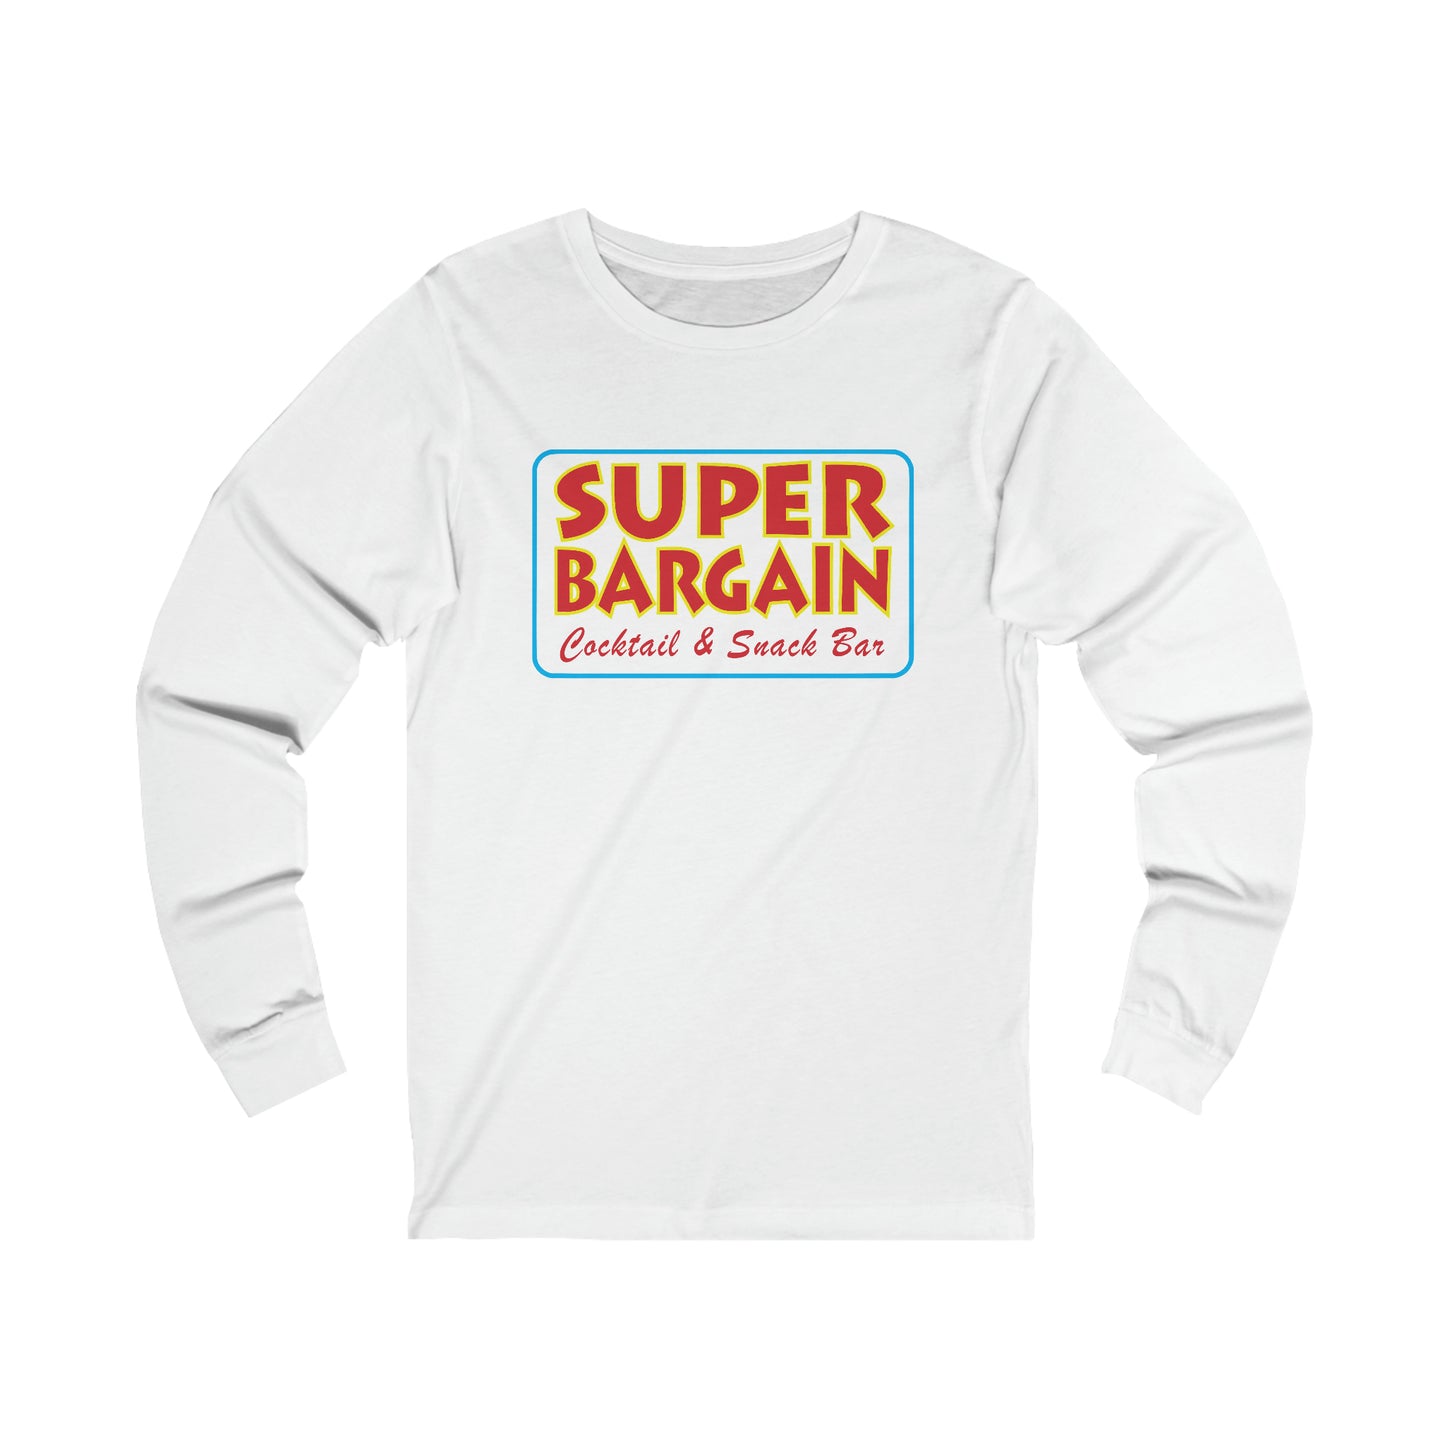 A white Unisex Jersey Long Sleeve Signature Logo Tee with the Printify logo "SUPER BARGAIN Toronto Cocktail & Snack Bar" in colorful text printed on the chest.